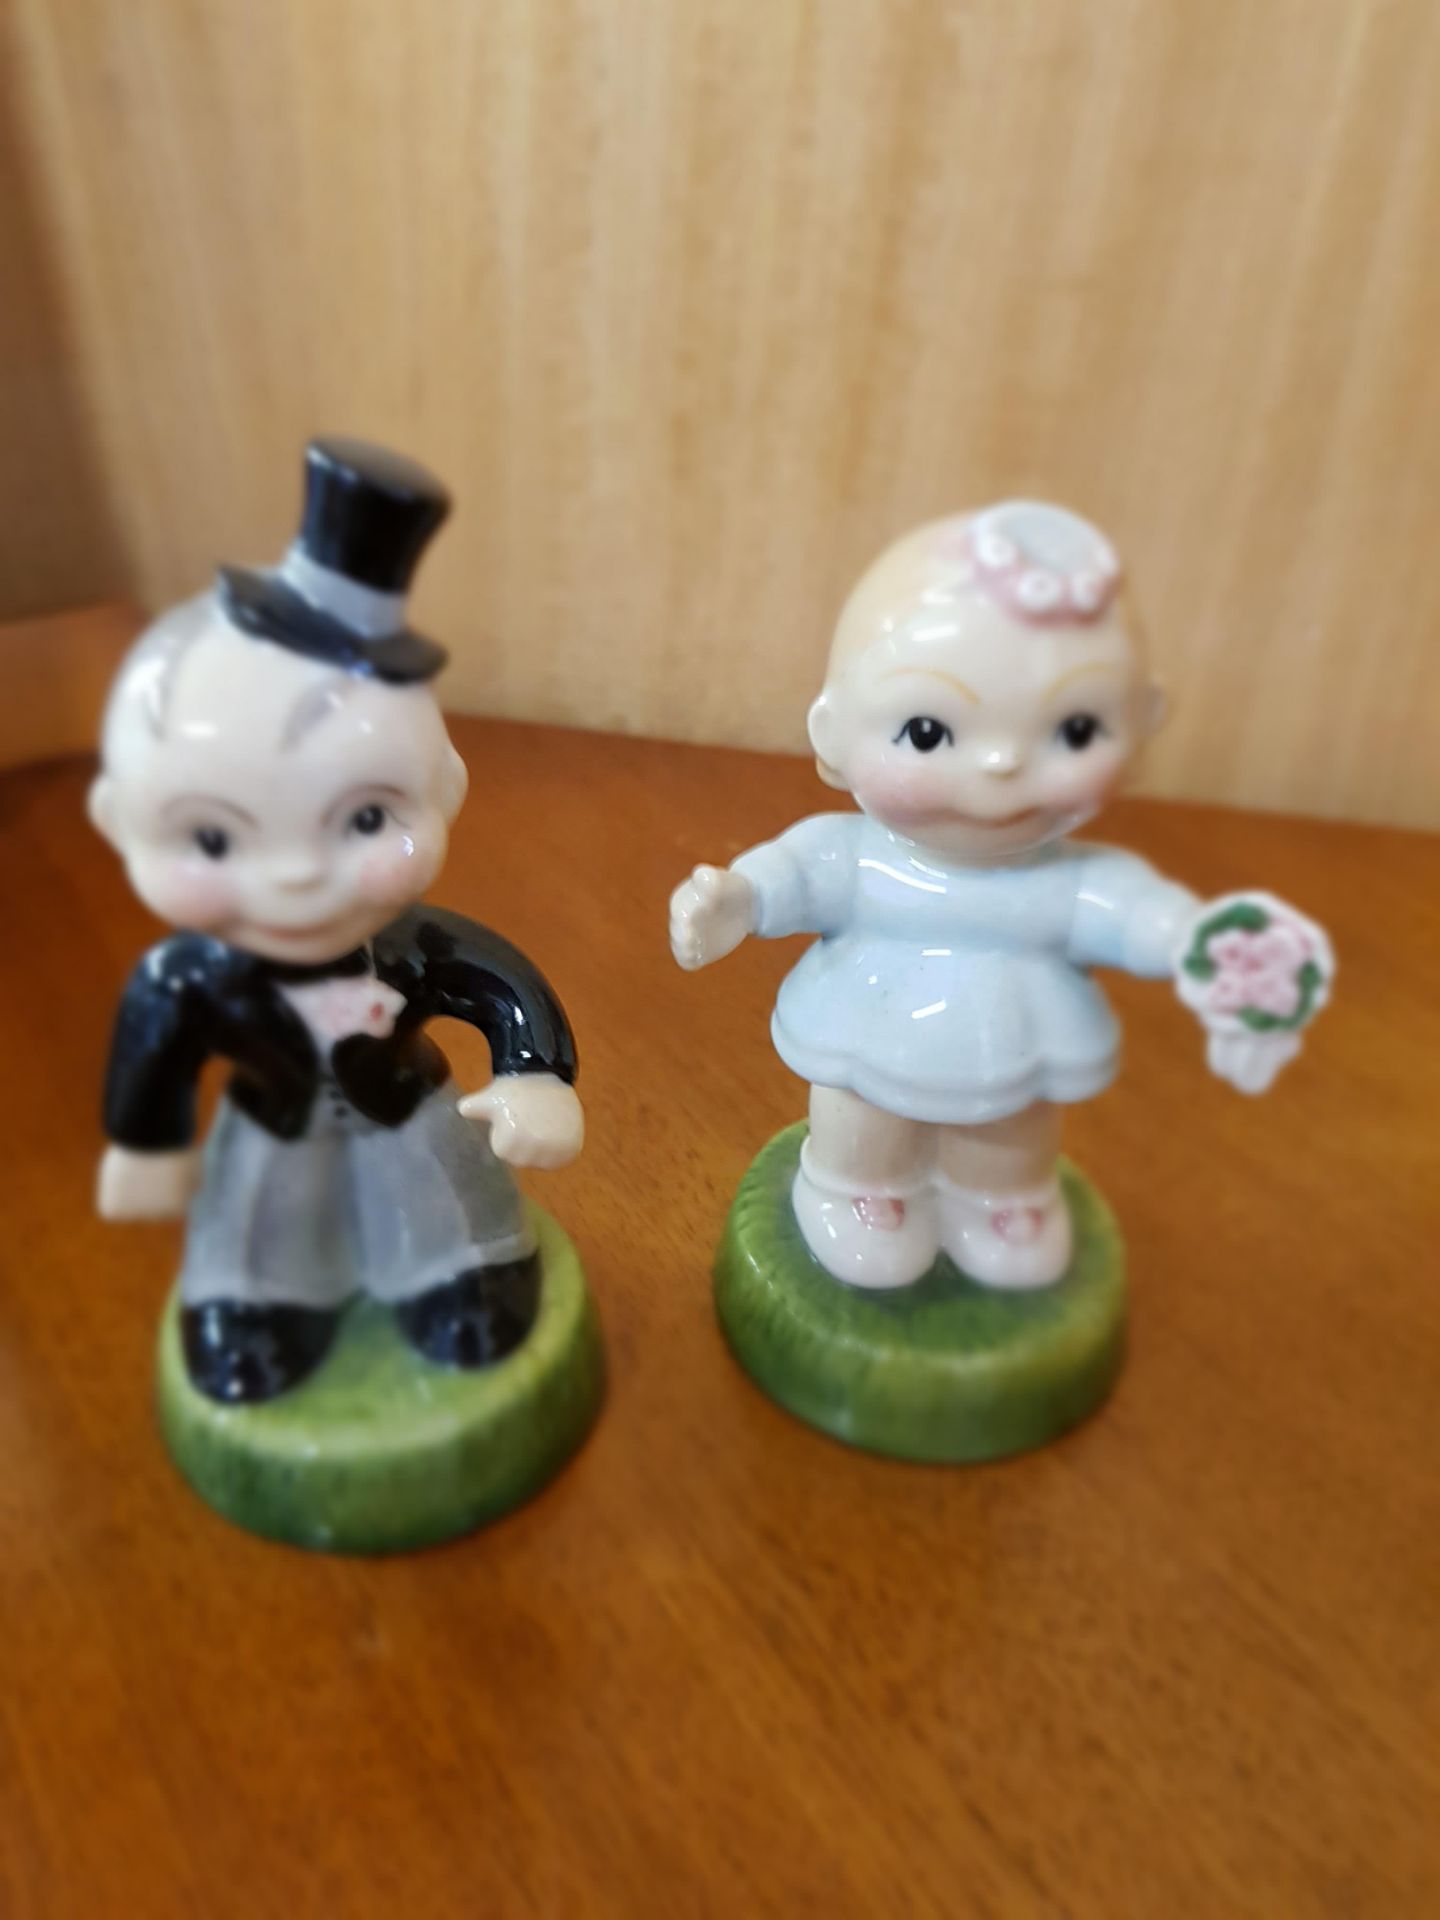 Carlton Ware Kids Limited Edition 'Bride And Groom'